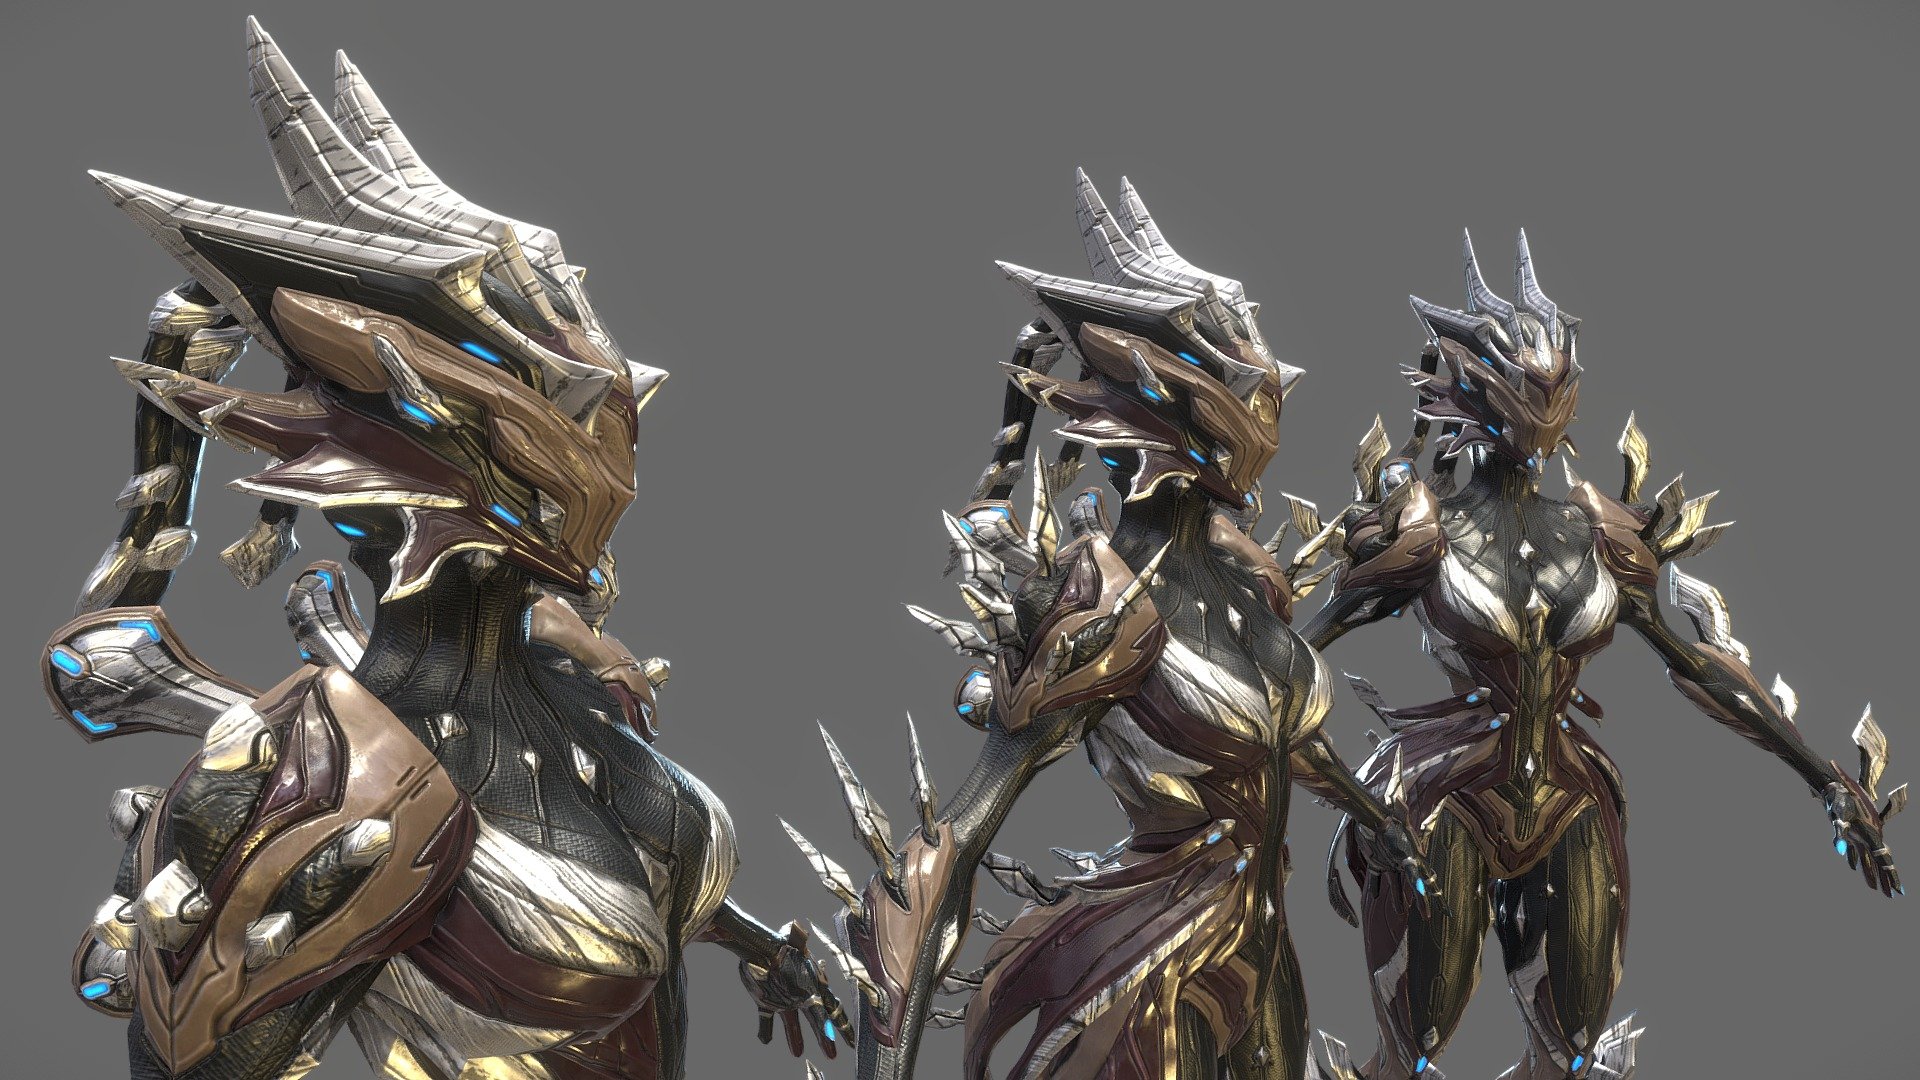 Khora Fiera Helmet &ndash; V2.0  

A submission to Tennogen for the game:  Warframe
Link to submission:  

She Protecc, She Attacc, She Medicc!  :-)

A Collaborative effort with the talented Debbysheen!  (See more of her amazing work at the following link! - https://www.artstation.com/debby_illanes 

An alternate helmet for the Warframe, Khora.

Note: Only the helmet basemesh and the helmet tail basemesh &amp; Textures are our creation. 
The Body Basemesh, Body Spikes, &amp; Textures are property of Digital Extremes 3d model